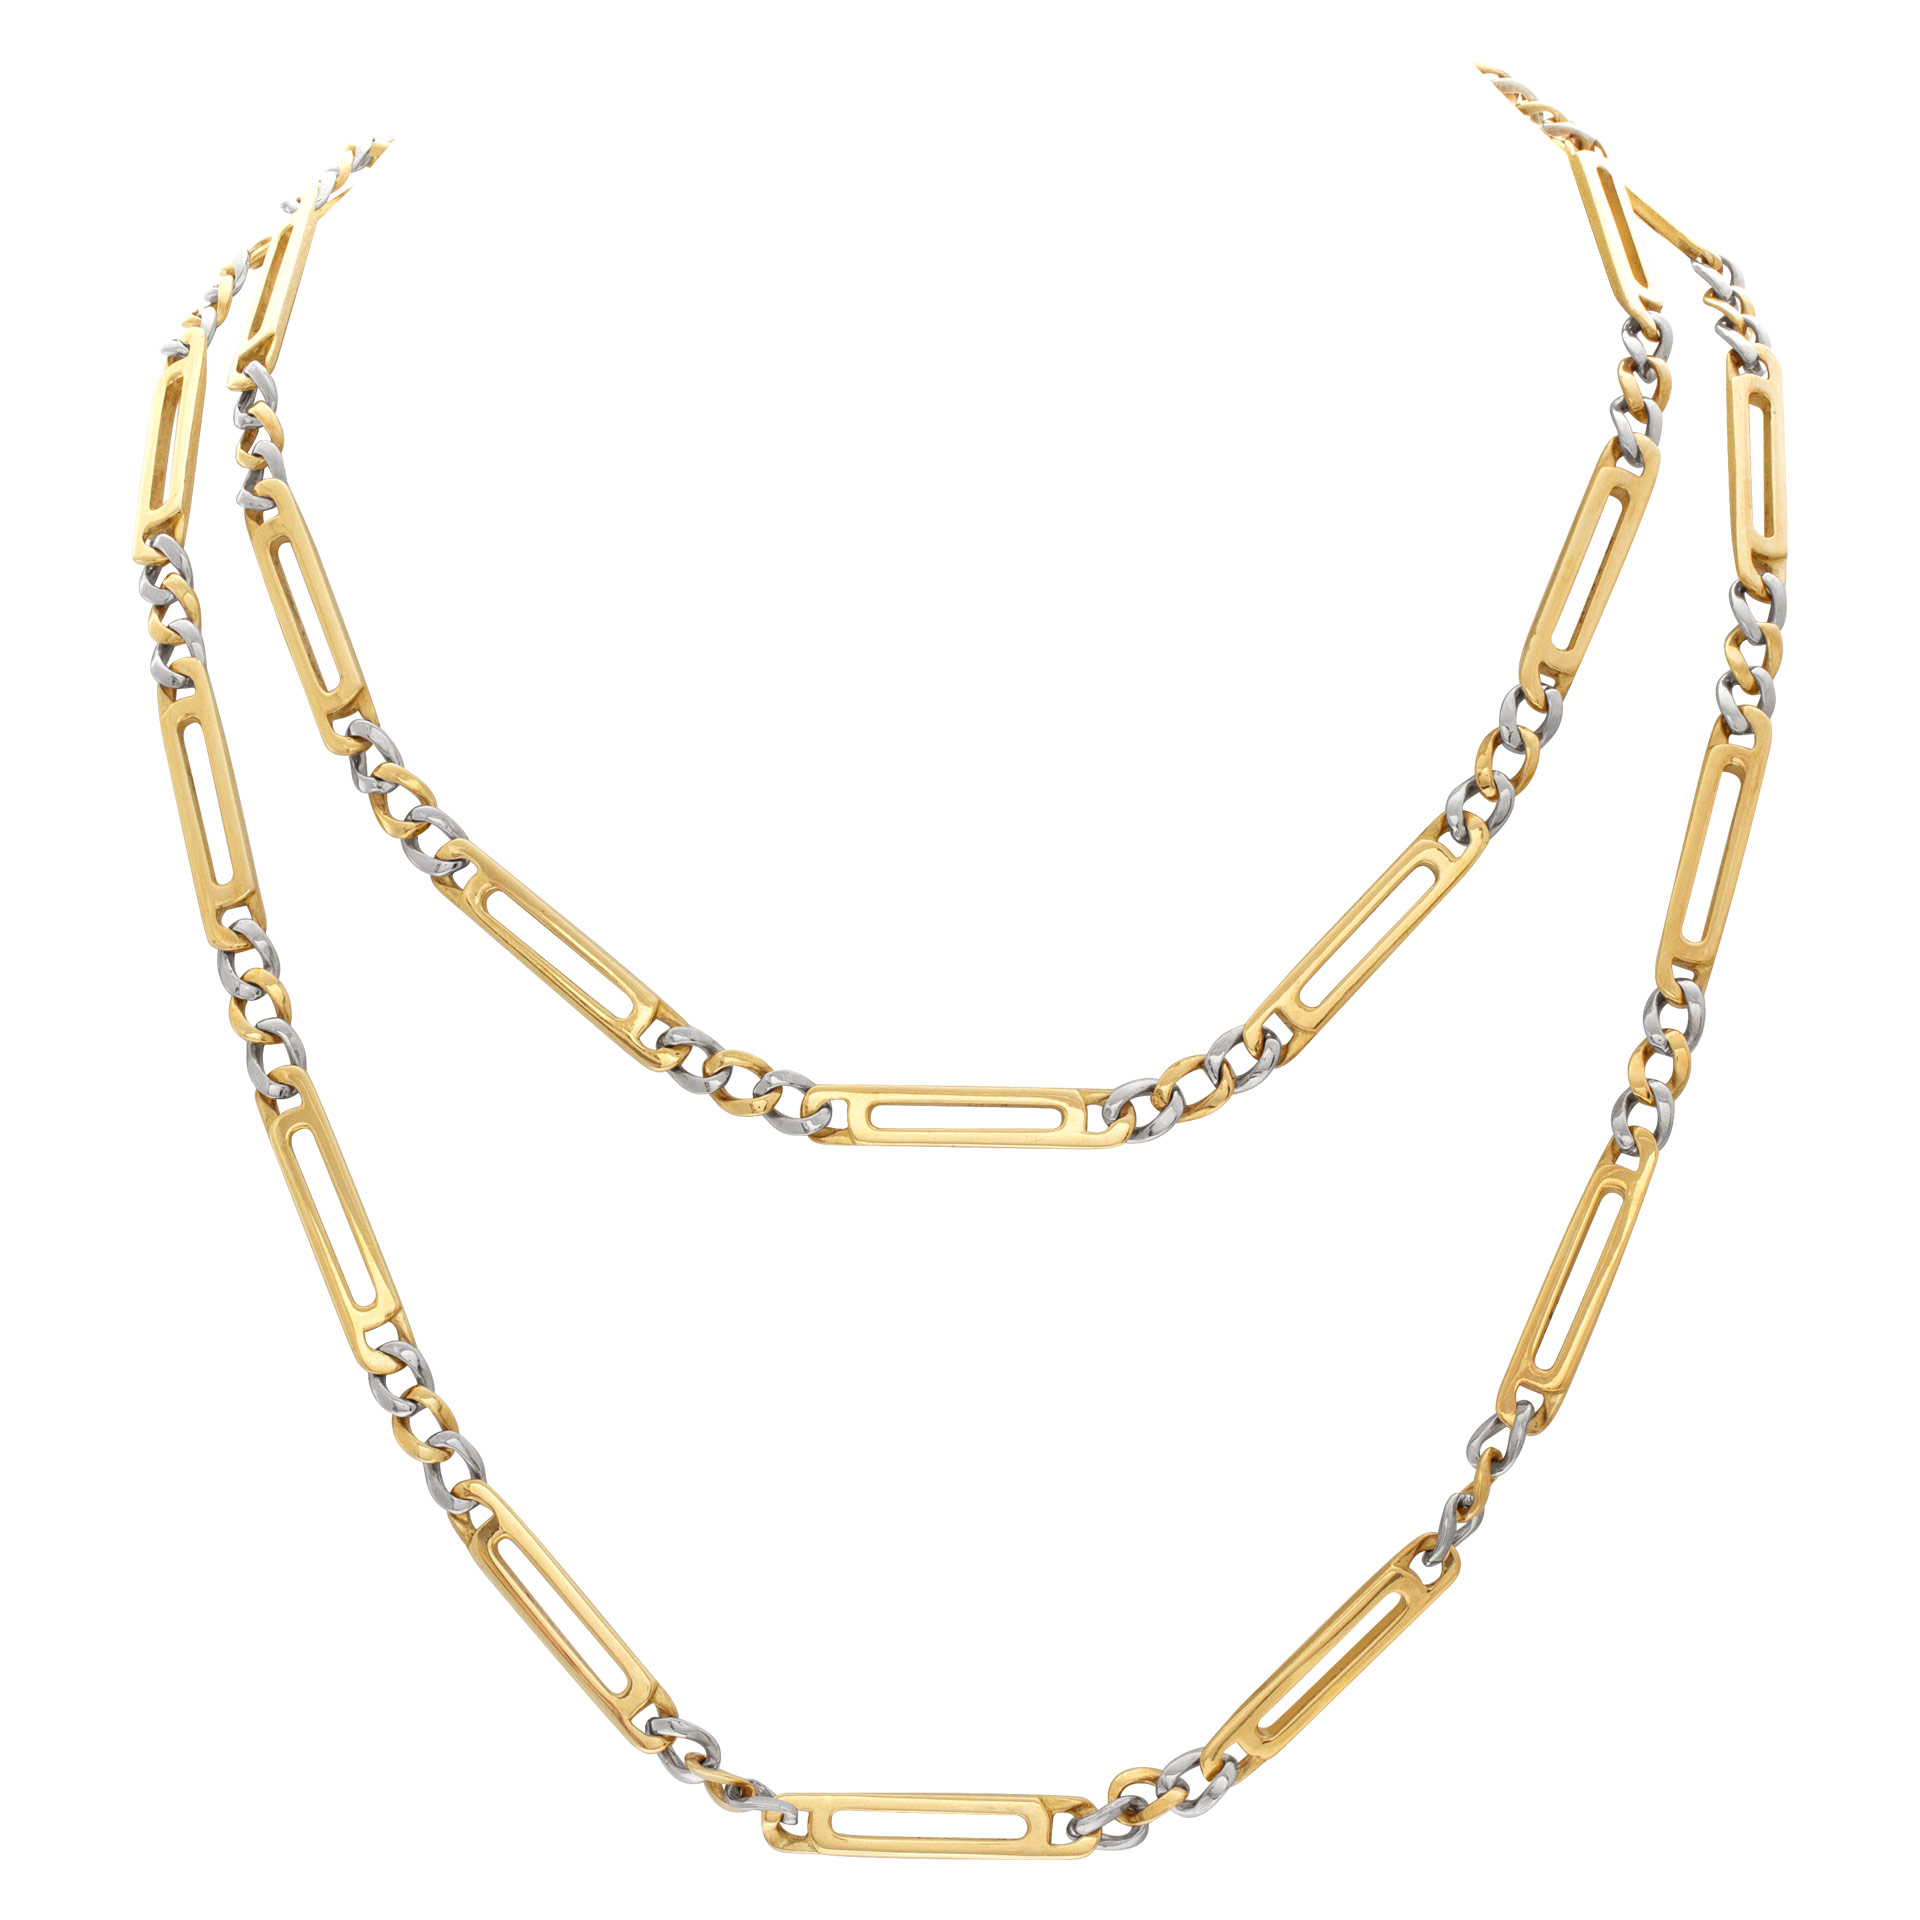 Unique Figaro link necklace in 18k. 36" length image 1